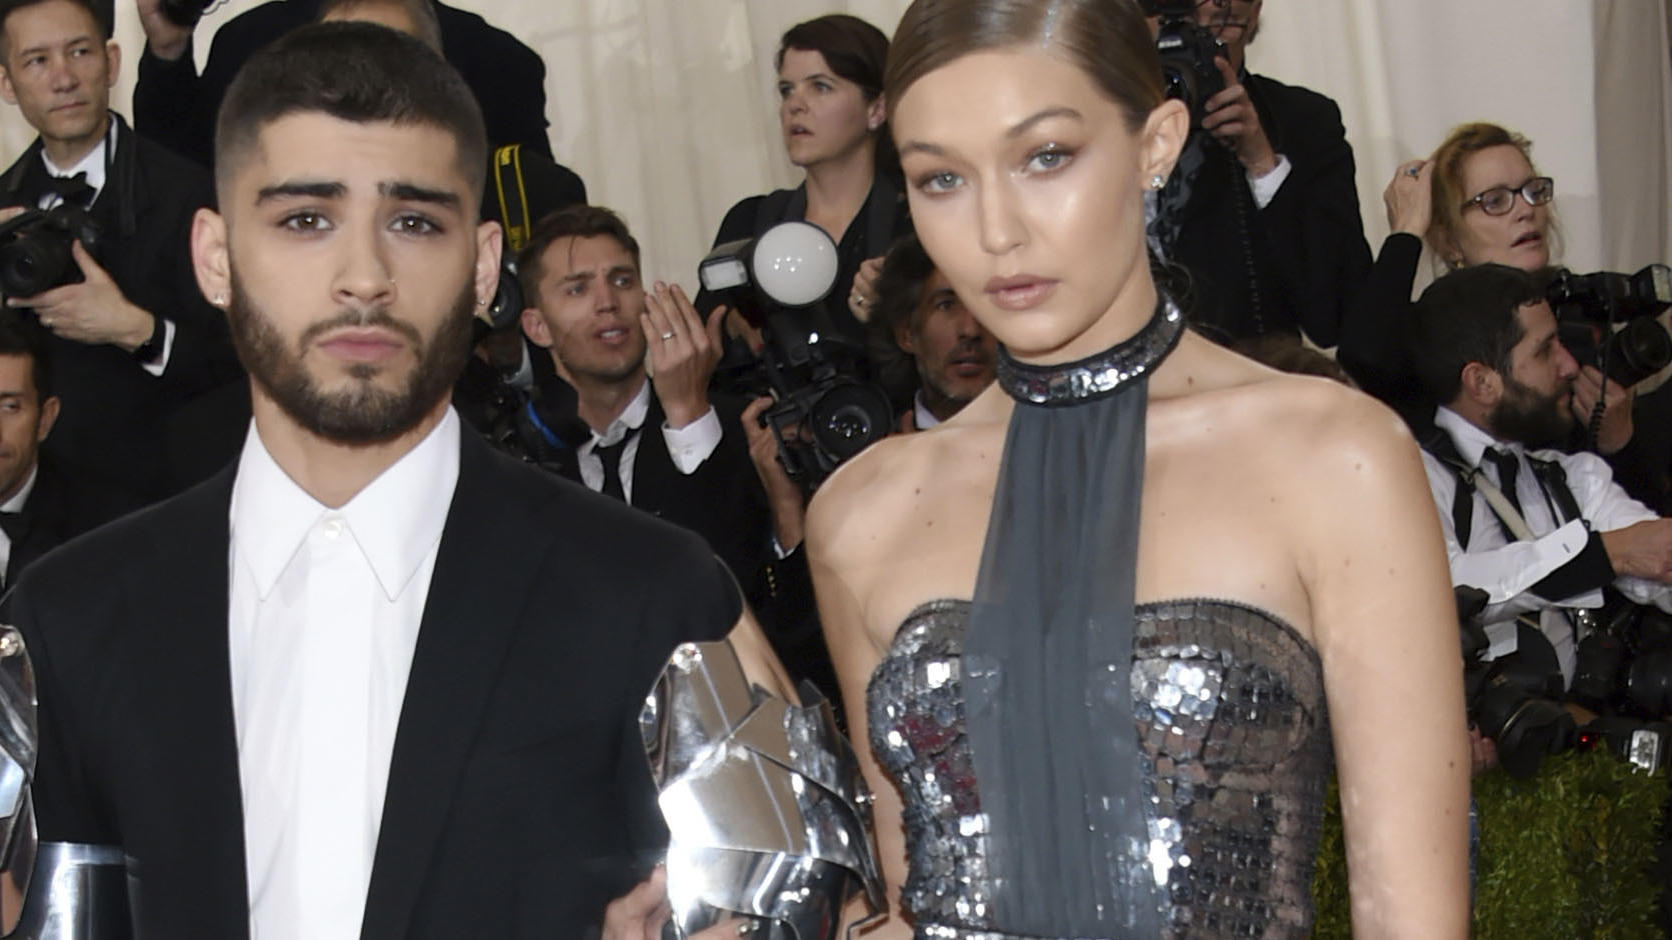 FILE - In this May 2, 2016 file photo, Zayn Malik, left, and Gigi Hadid arrive at The Metropolitan Museum of Art Costume Institute Benefit Gala in New York. The couple took to social media Wednesday, Sept. 23, 2020, to celebrate the arrival of their 